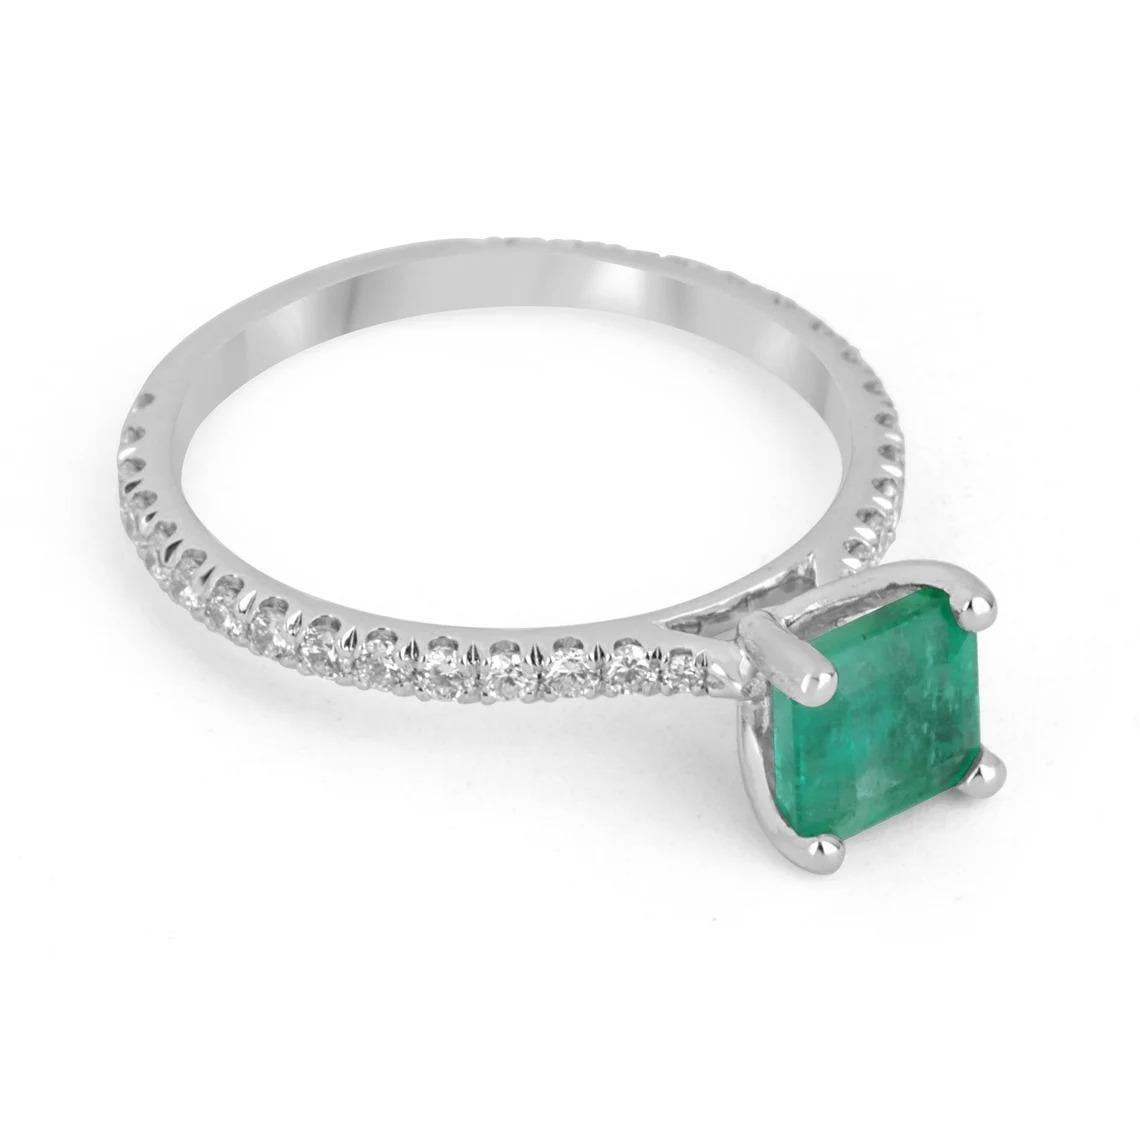 Elegantly displayed is a natural Asscher-cut emerald and diamond ring. The center gem is a beautiful quality, Asscher cut, emerald filled with life and brilliance! Among the emeralds, impressive qualities are their vibrant color and beautiful eye